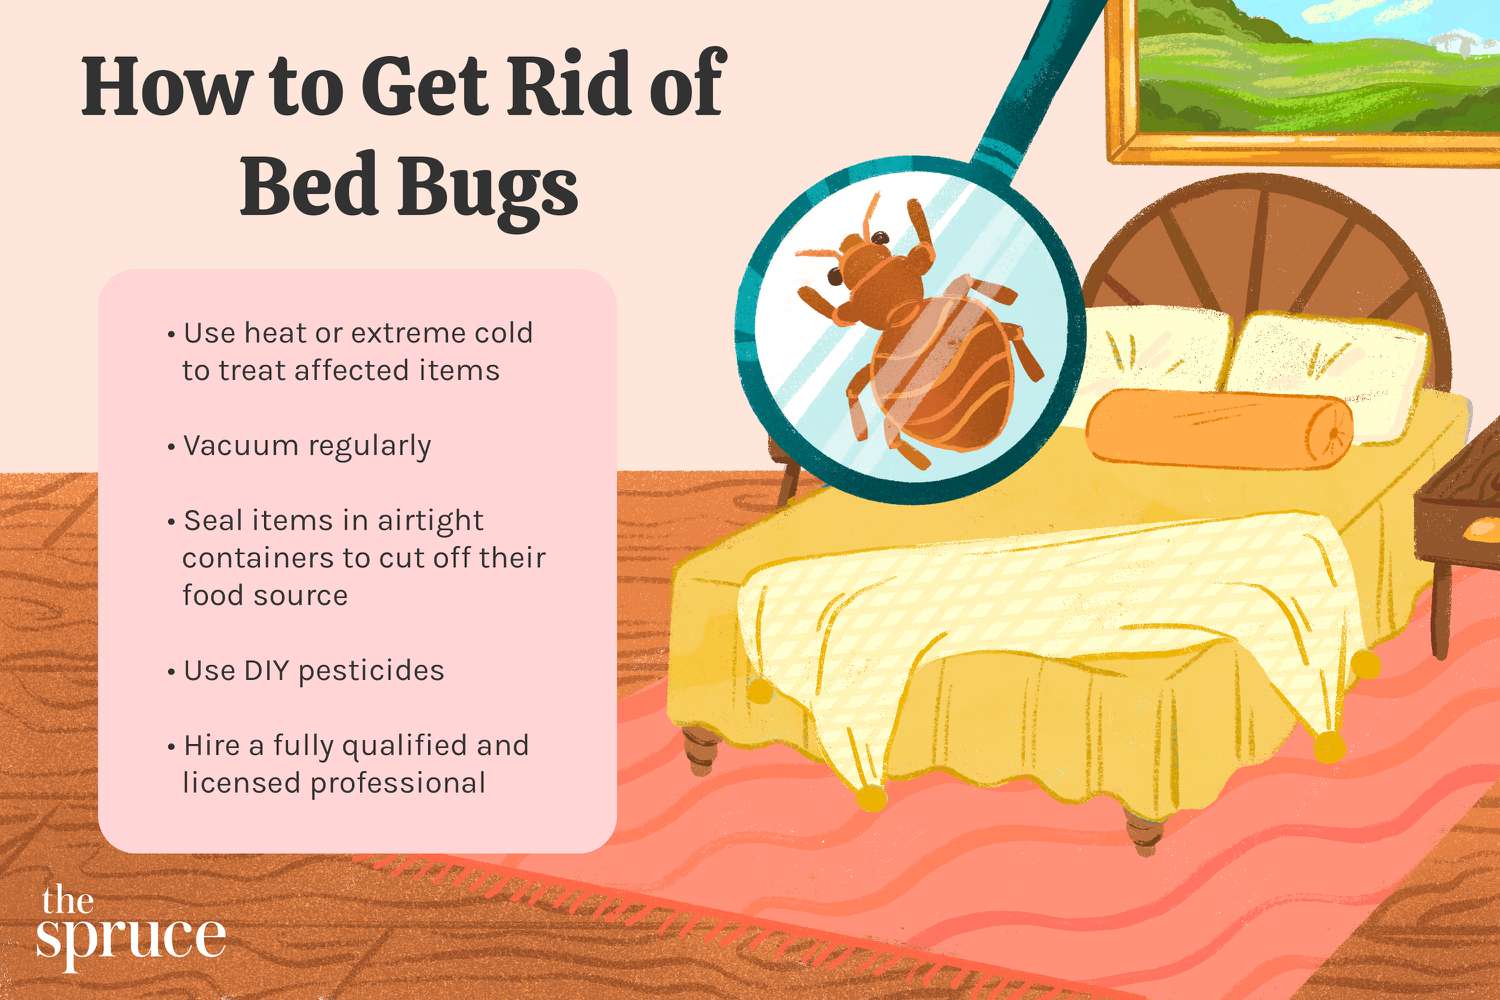 How to Attract And Kill Bed Bugs?